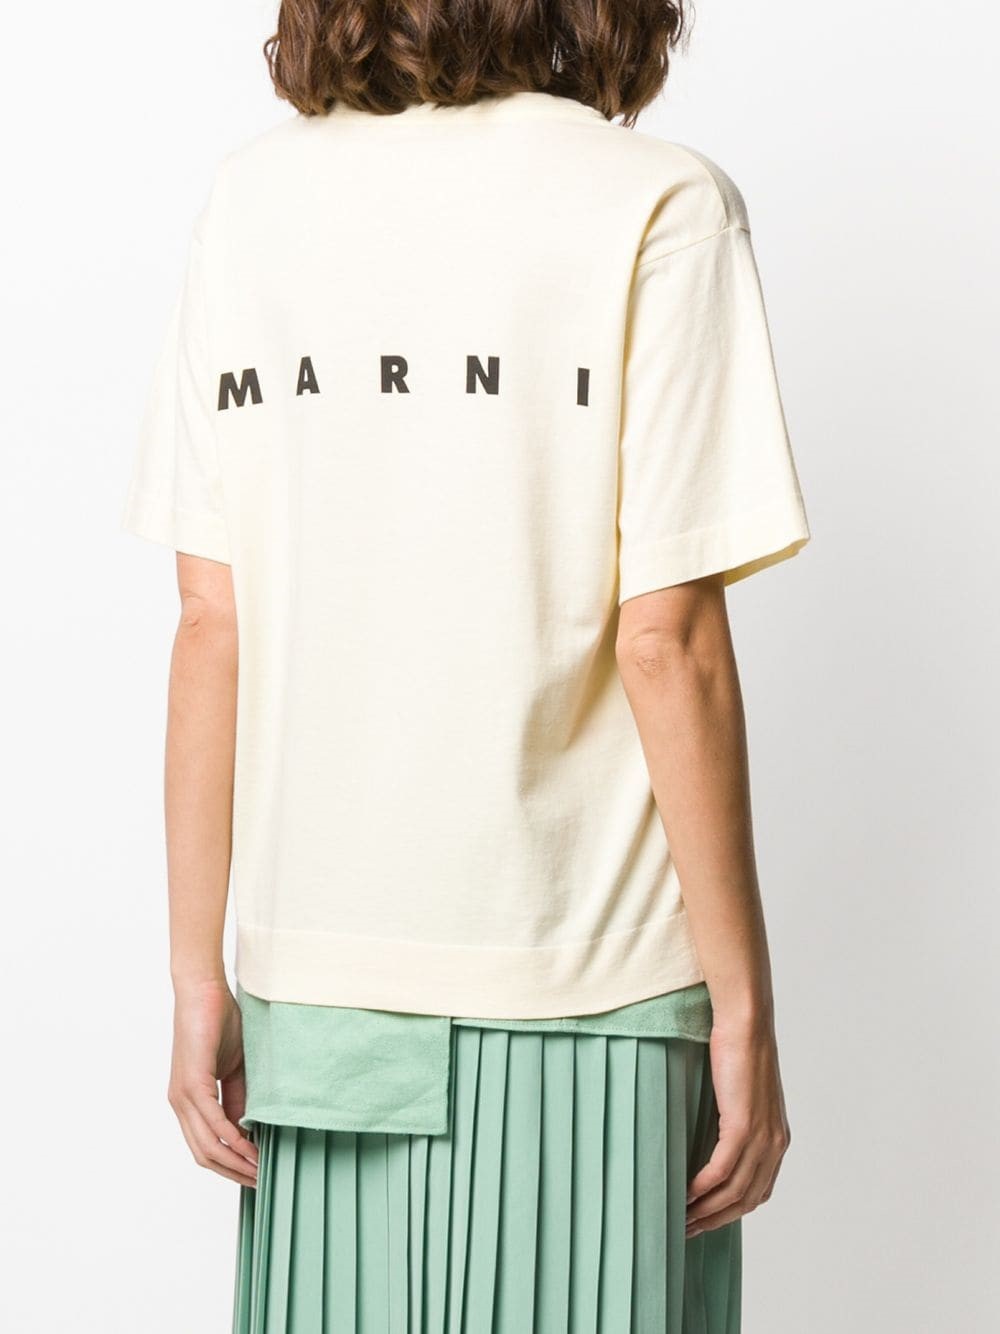 marni T-SHIRT available on montiboutique.com - 32110